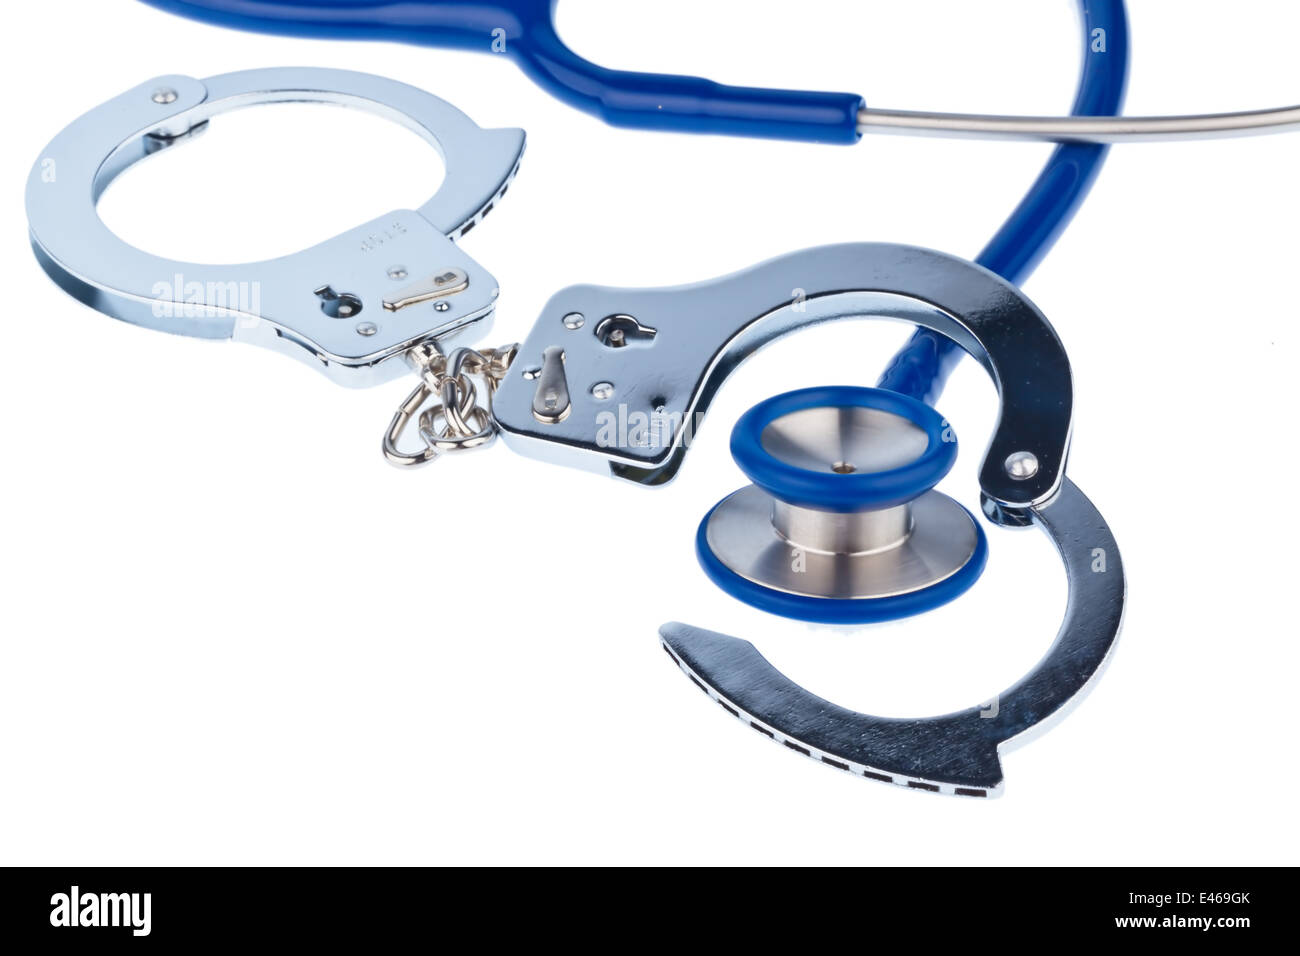 Handcuffs and a stethoscope lying on a white background. Stock Photo